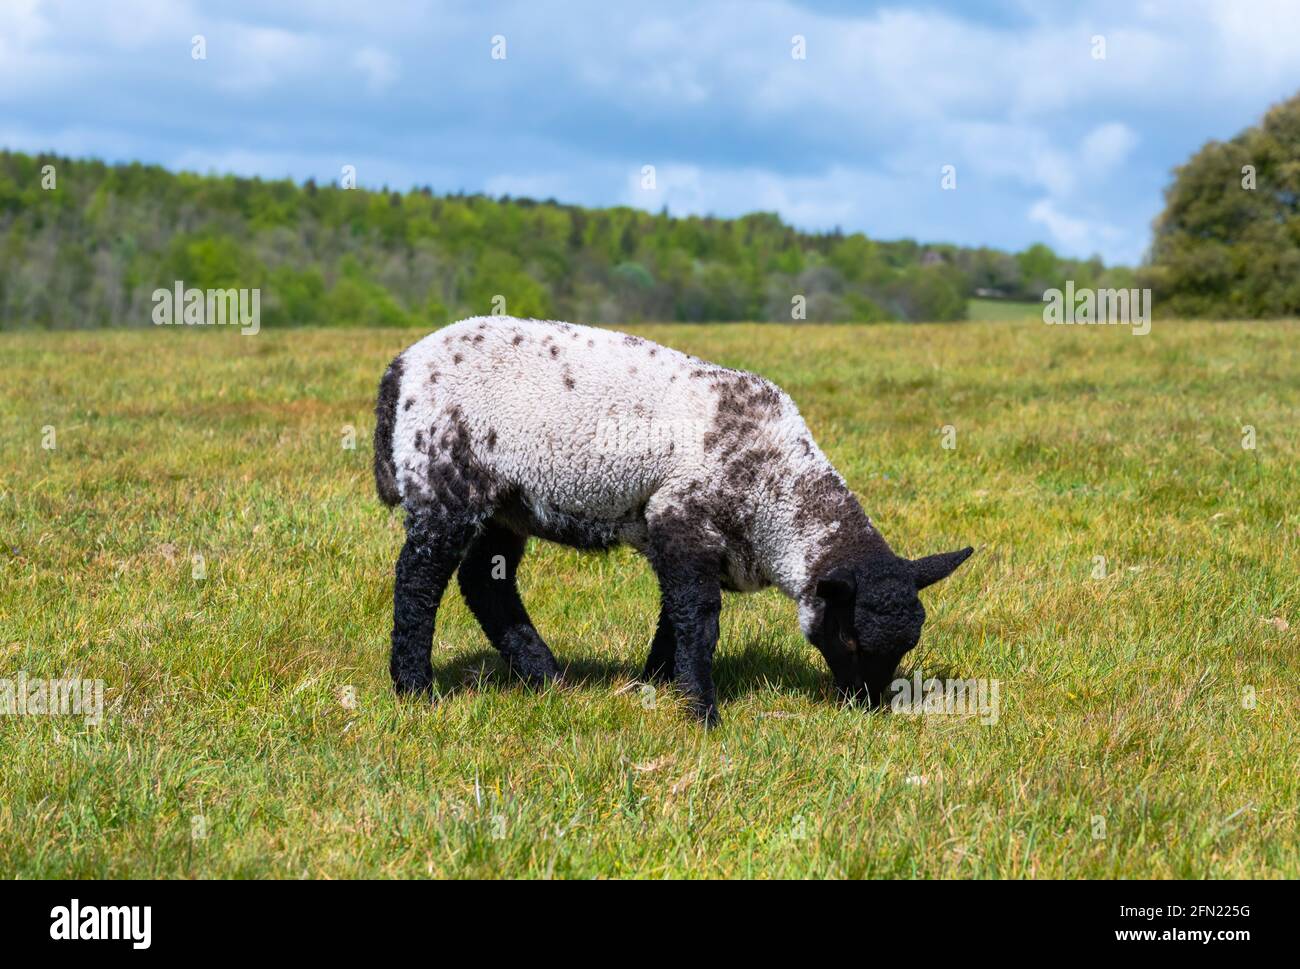 Lone lamb (Ovis aries) grazing on grass in a field in Spring in Arundel National Park on the South Downs in West Sussex, England, UK. Stock Photo